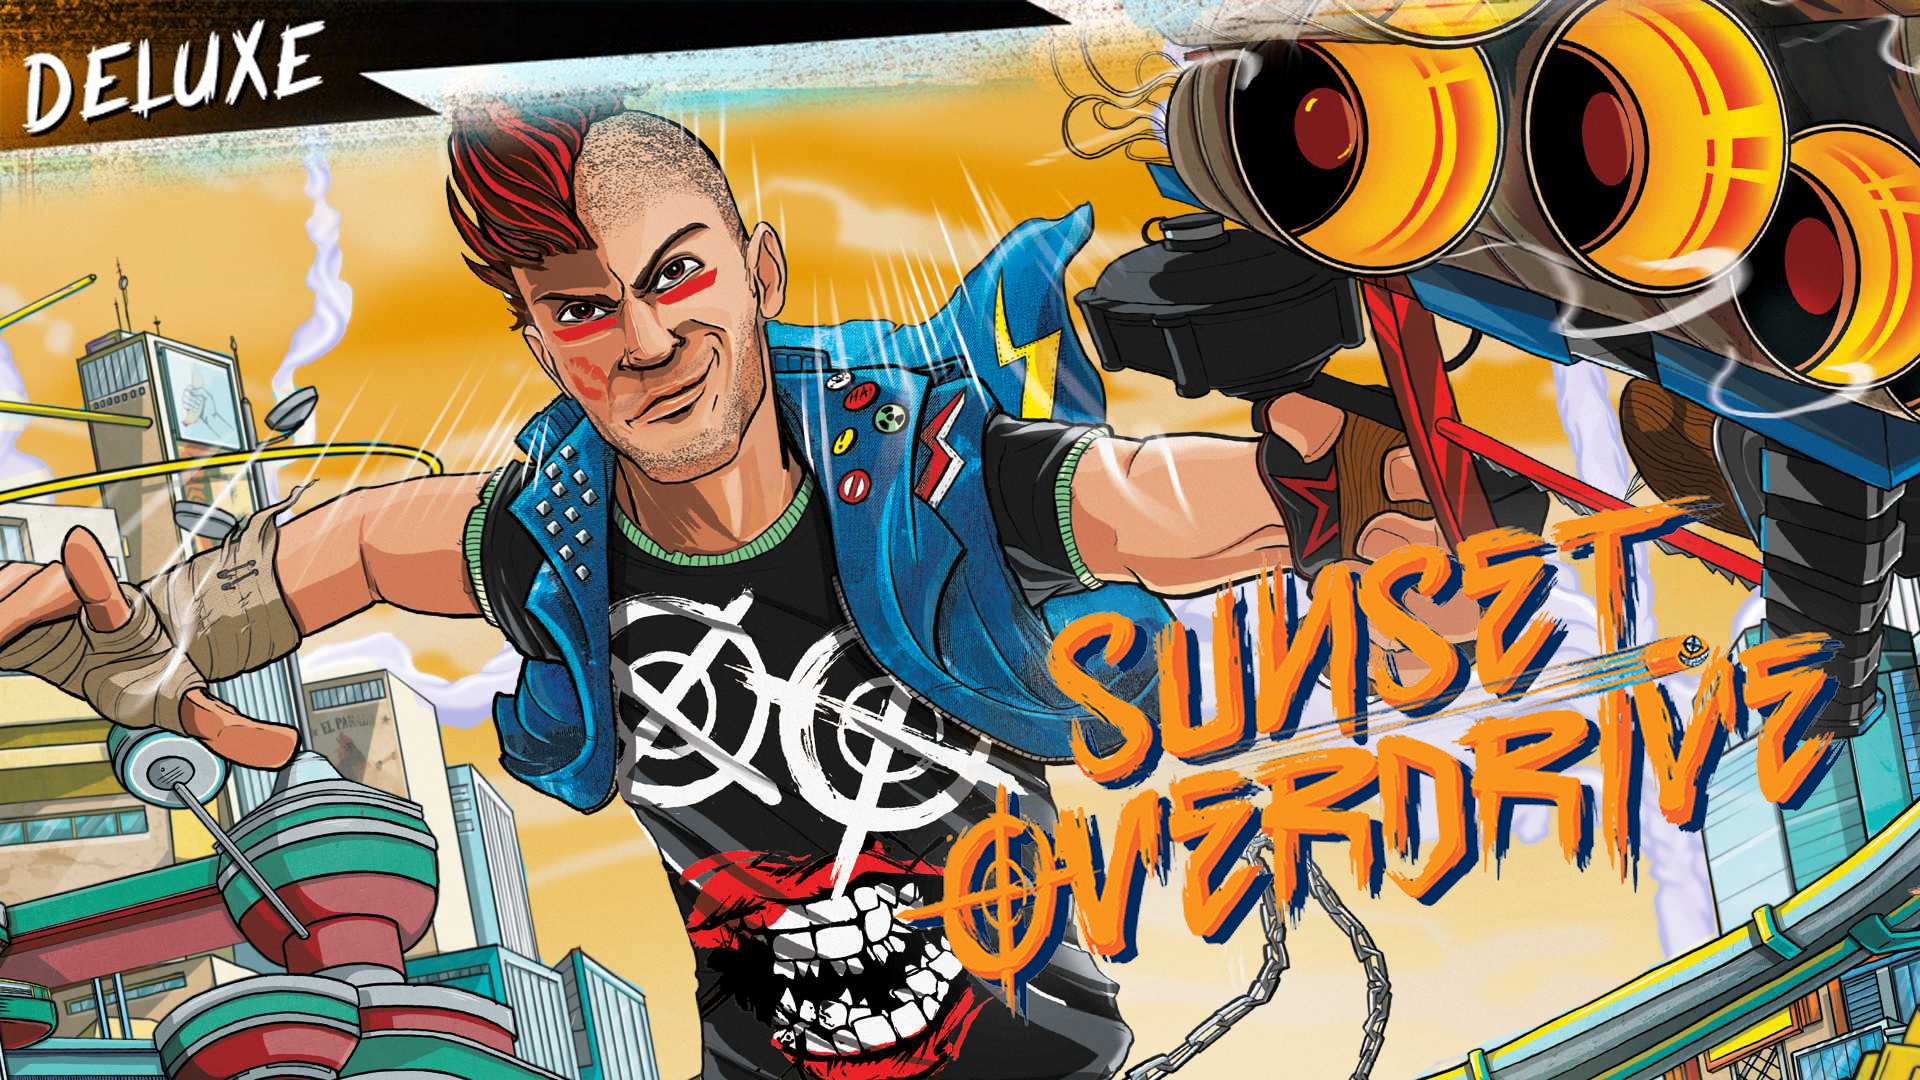 Sunset Overdrive - Xbox One (Standard Edition)